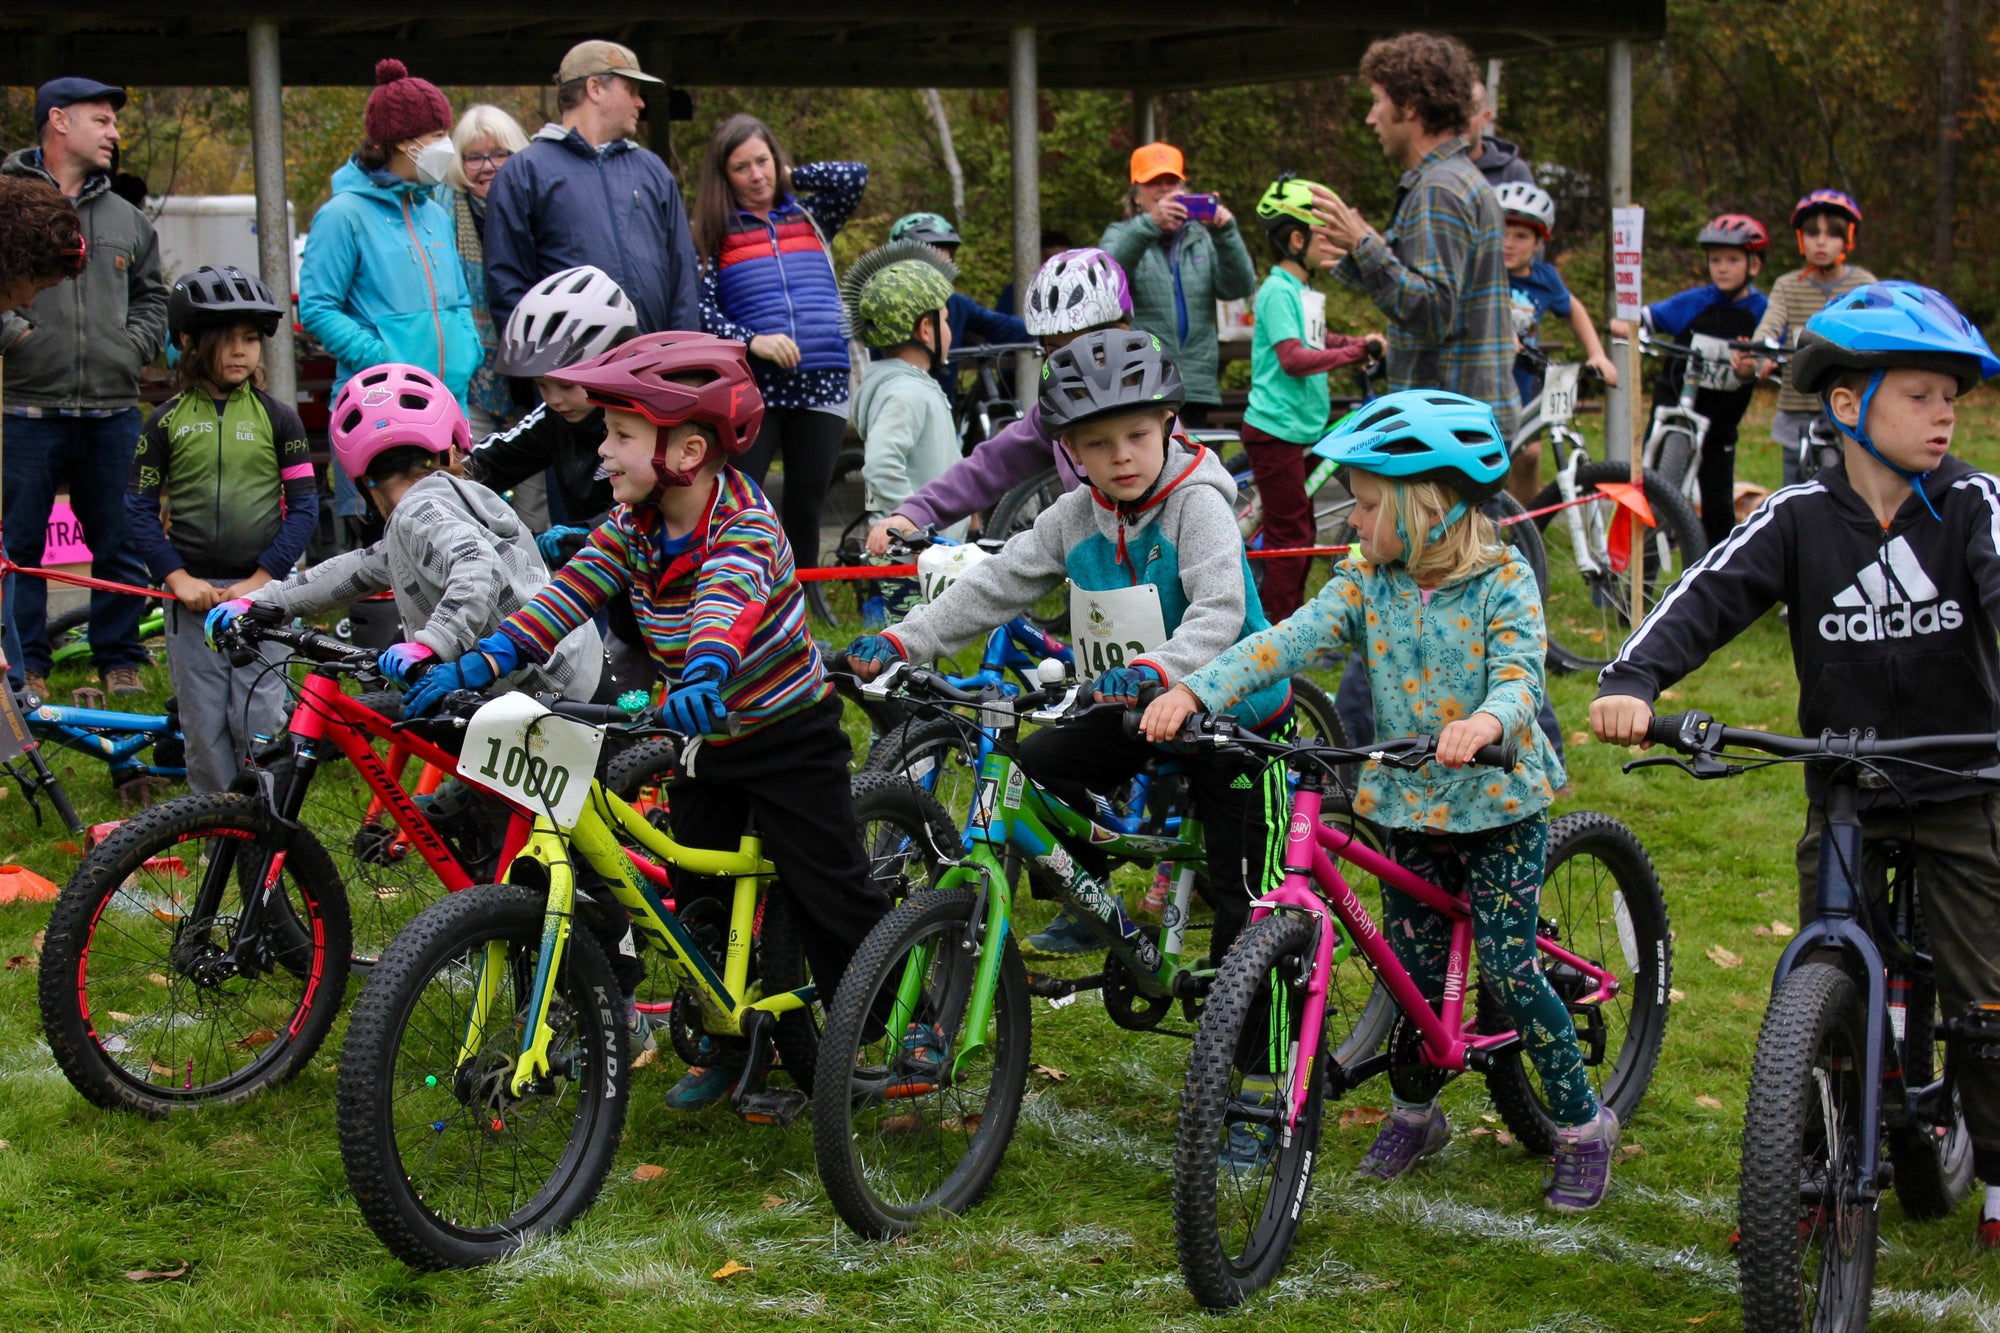 Seven kids lined up with their bikes for a cyclocross race